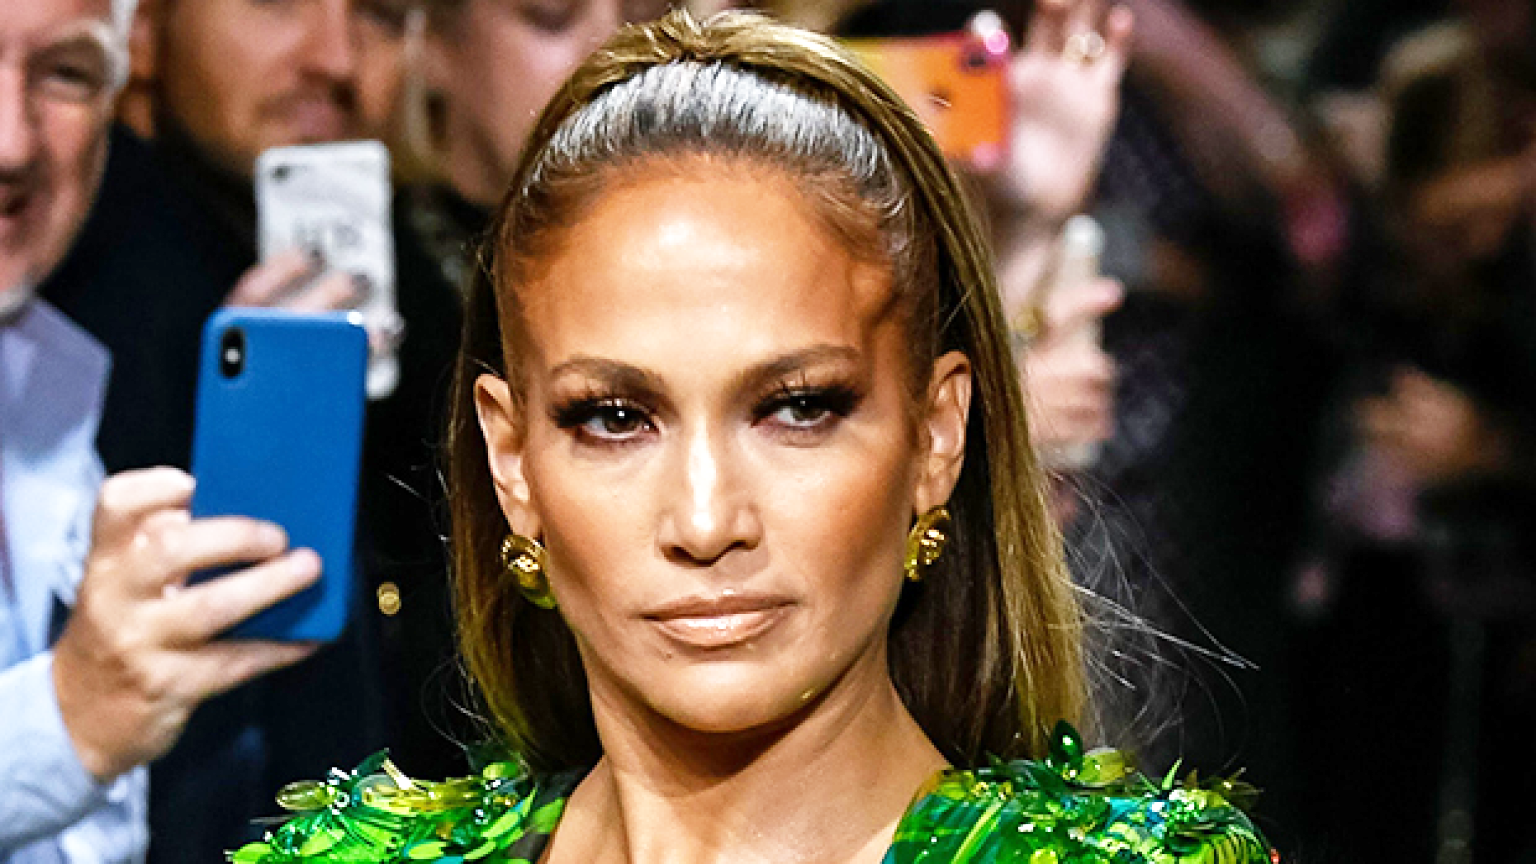 Jennifer Lopez Slays in Plunging Green Sequin Dress for Night Out With Ben Affleck